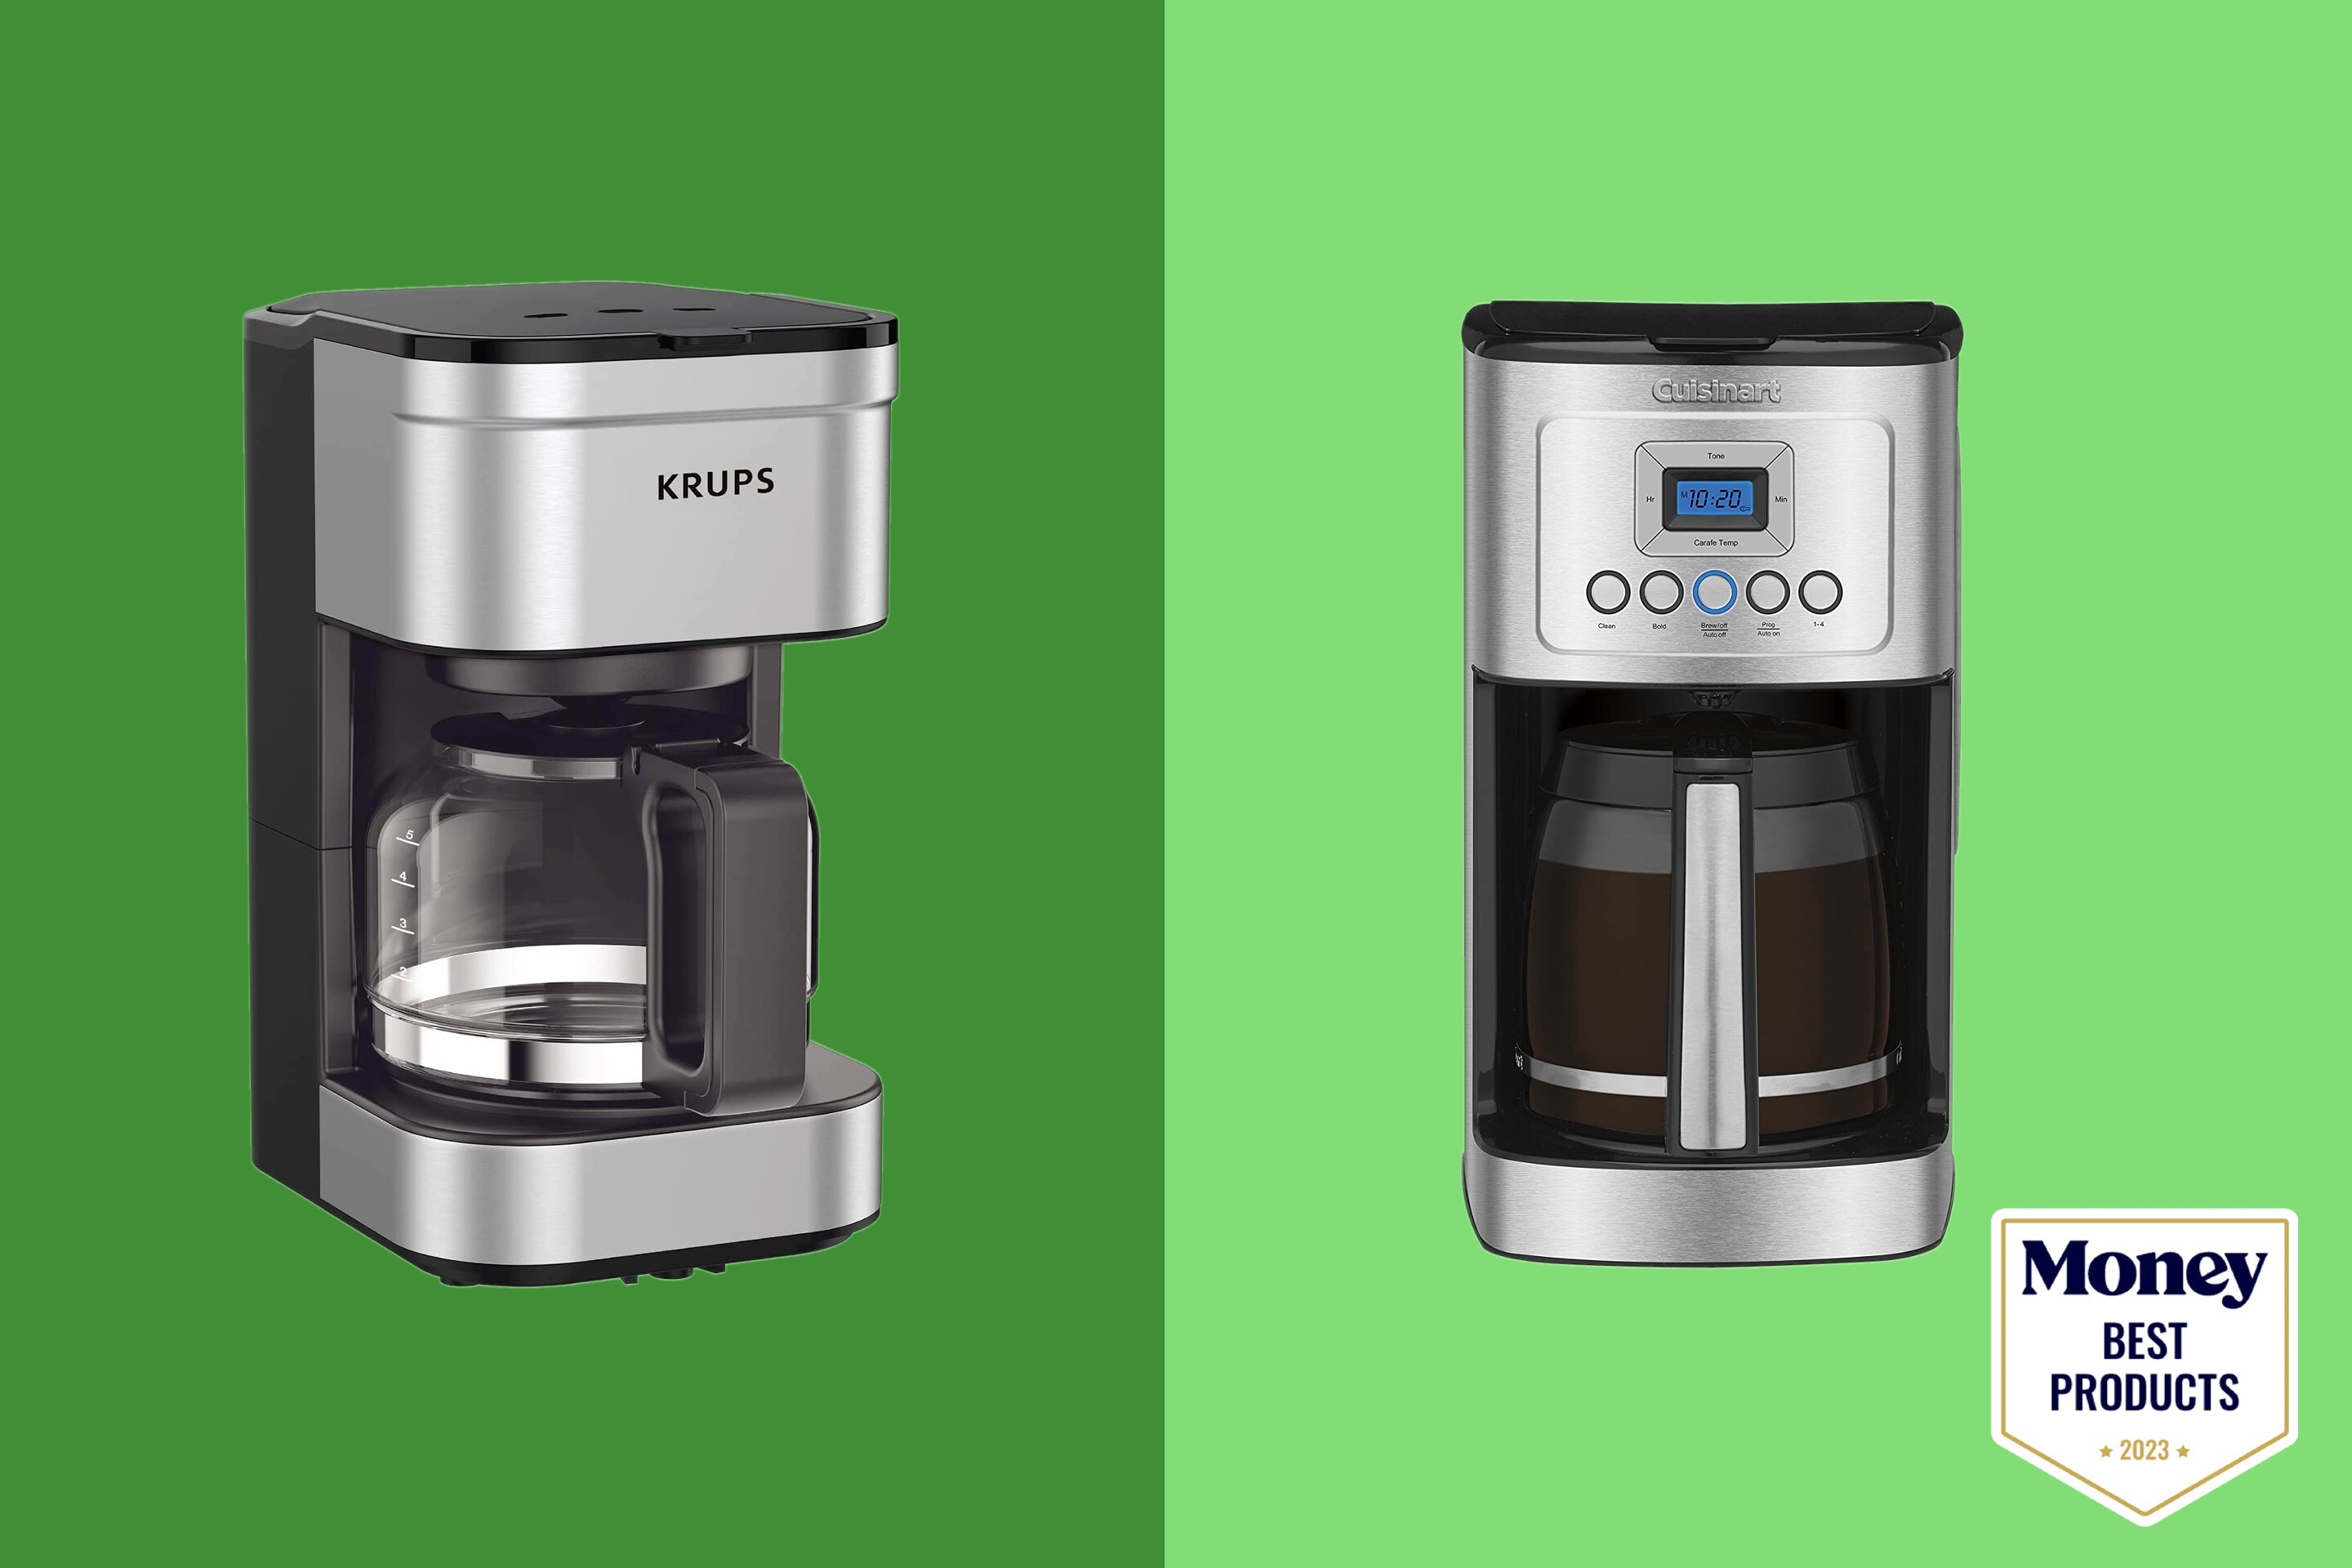 KRUPS Essential 12 Cup Drip Coffee Maker, Digital Programmable Brewer with  Auto-Start & Keep Warm